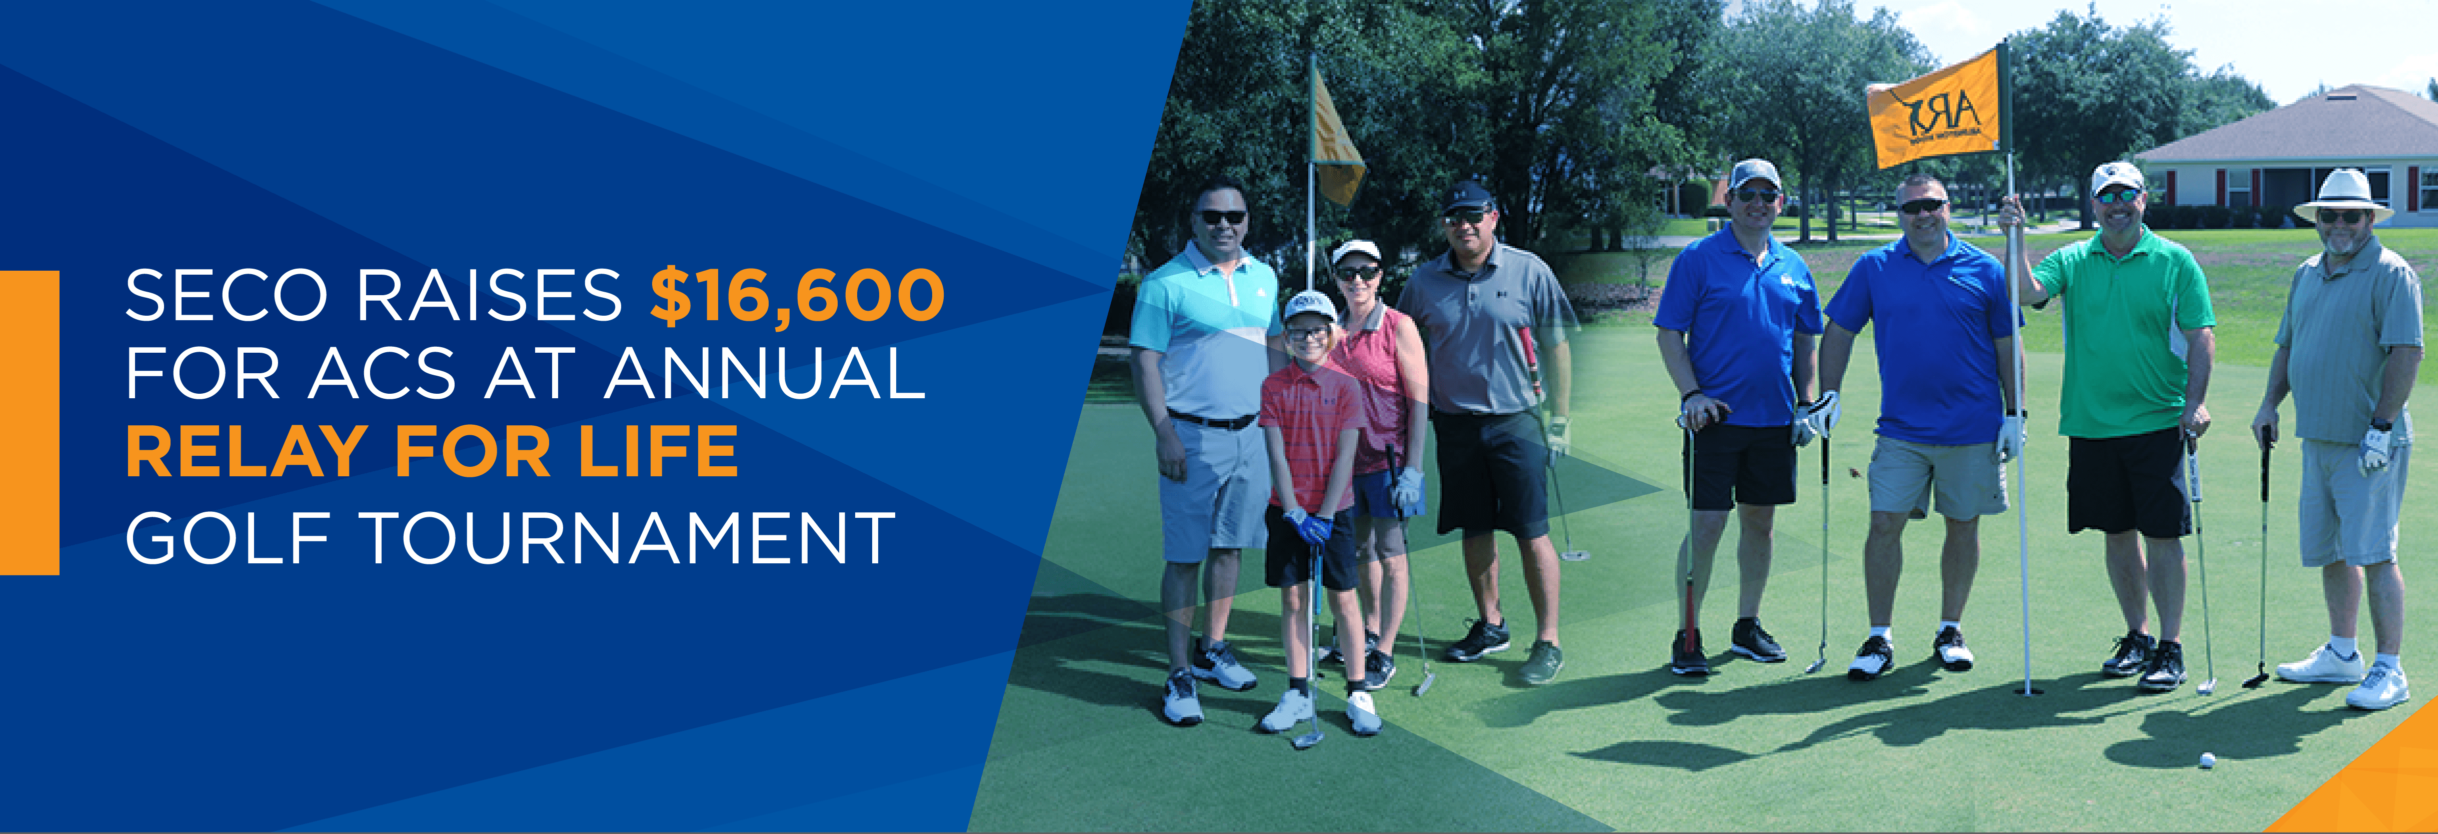 SECO Raises $16,600 for ACS at Annual Relay For Life Golf Tournament